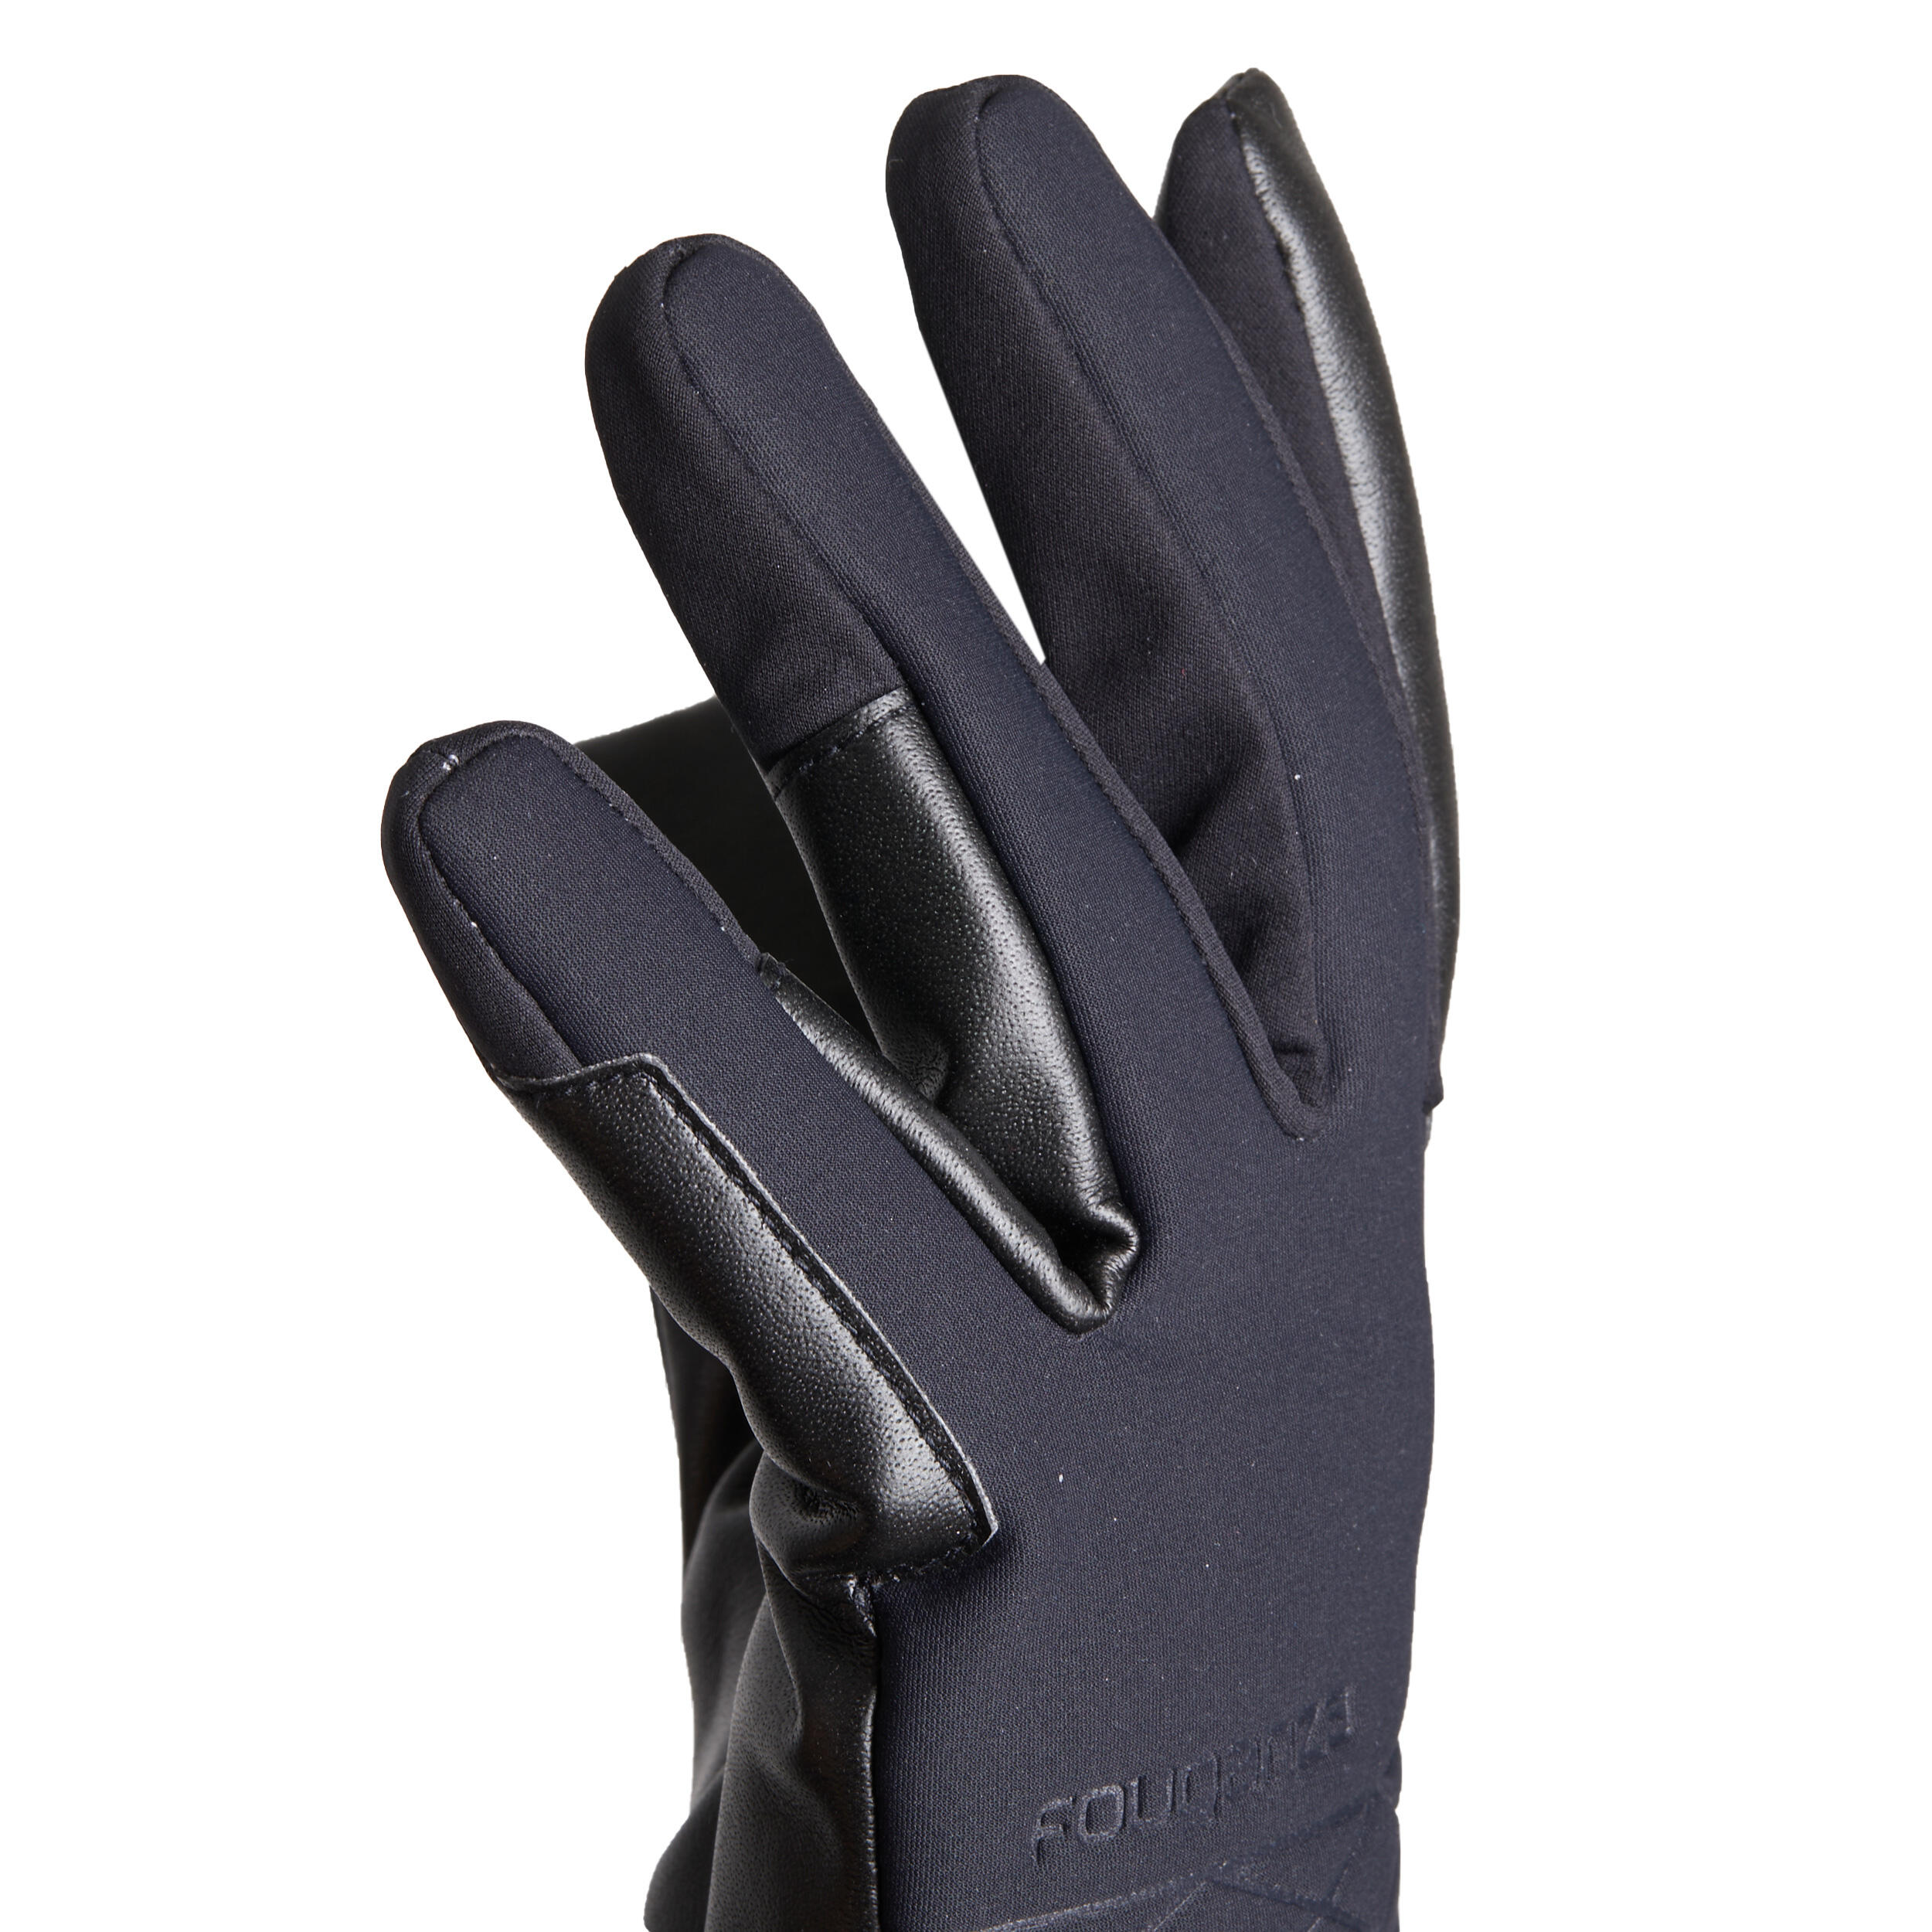 Women's Warm and Waterproof Horse Riding Gloves 900 Warm - Black 5/5